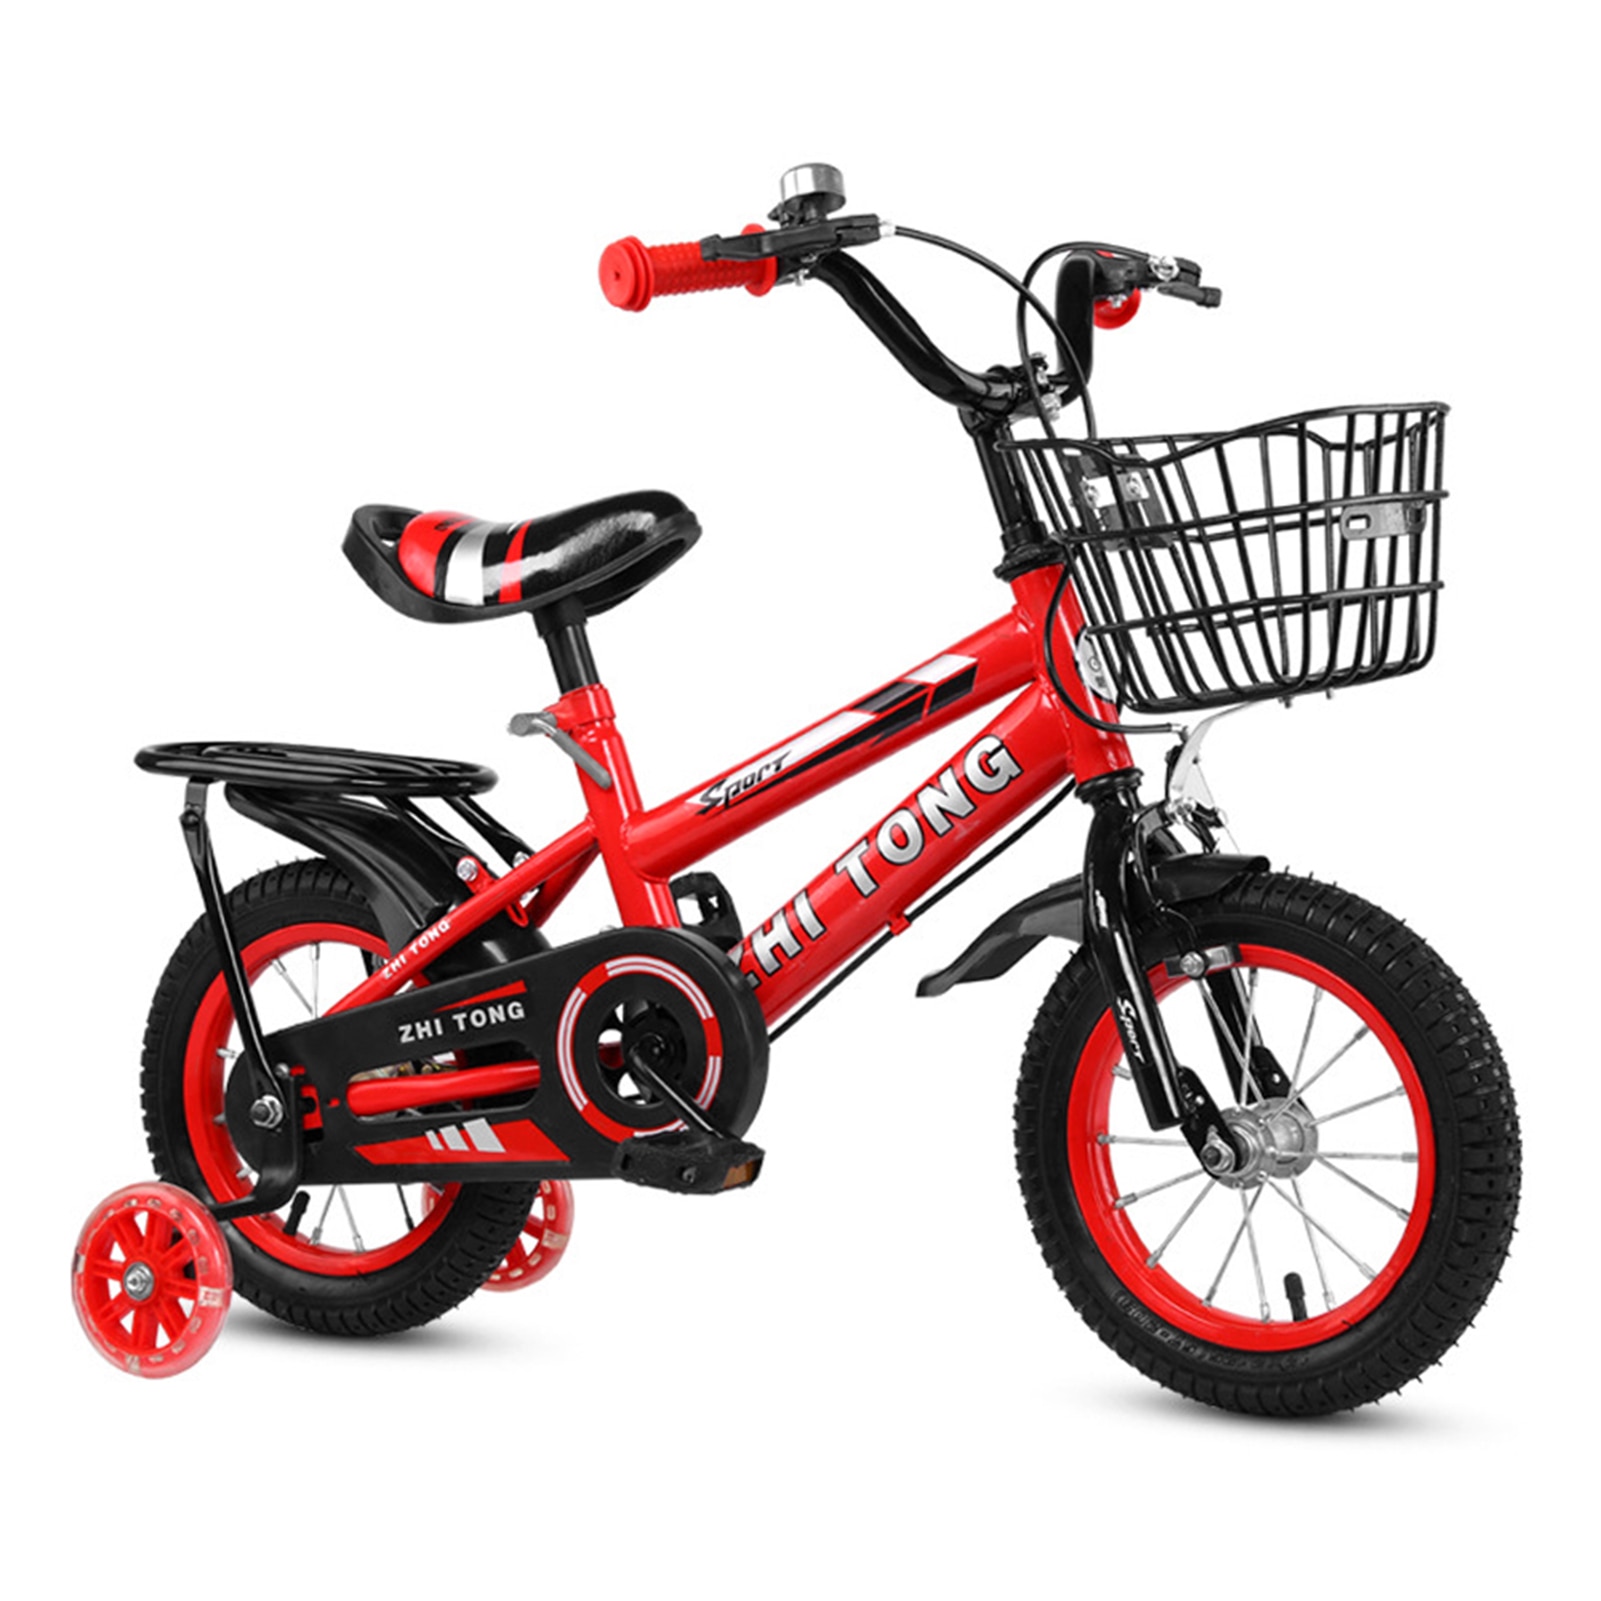 12/14/16 Inch Children Bike Boys Girls Toddler Bicycle Adjustable Height Kid Bicycle with Detachable Basket for 2-7 Years Old